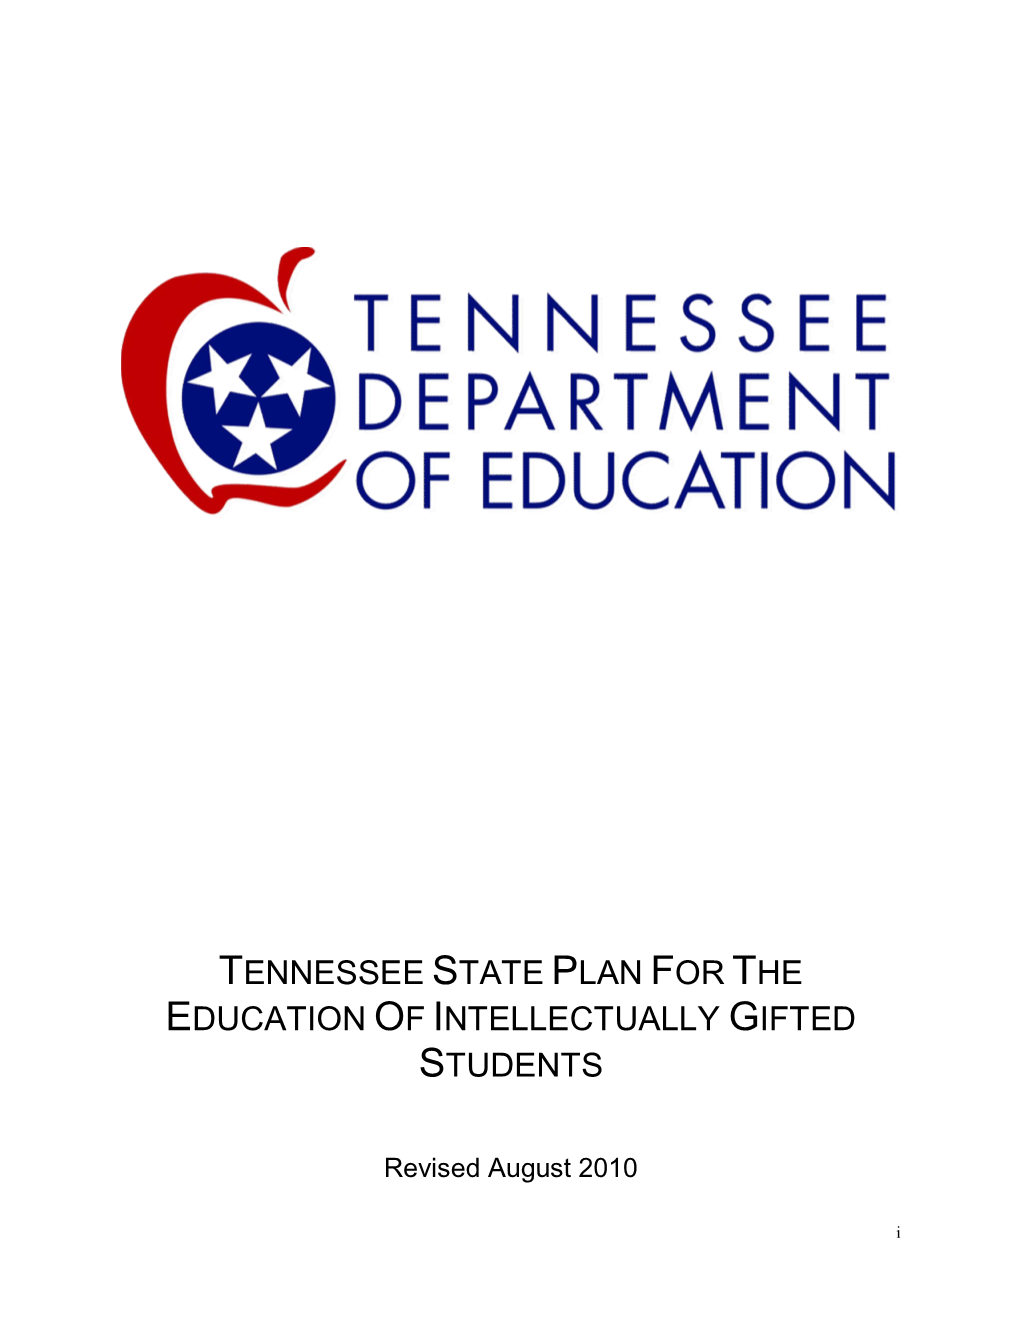 Tennessee State Plan for the Education of Intellectually Gifted Students